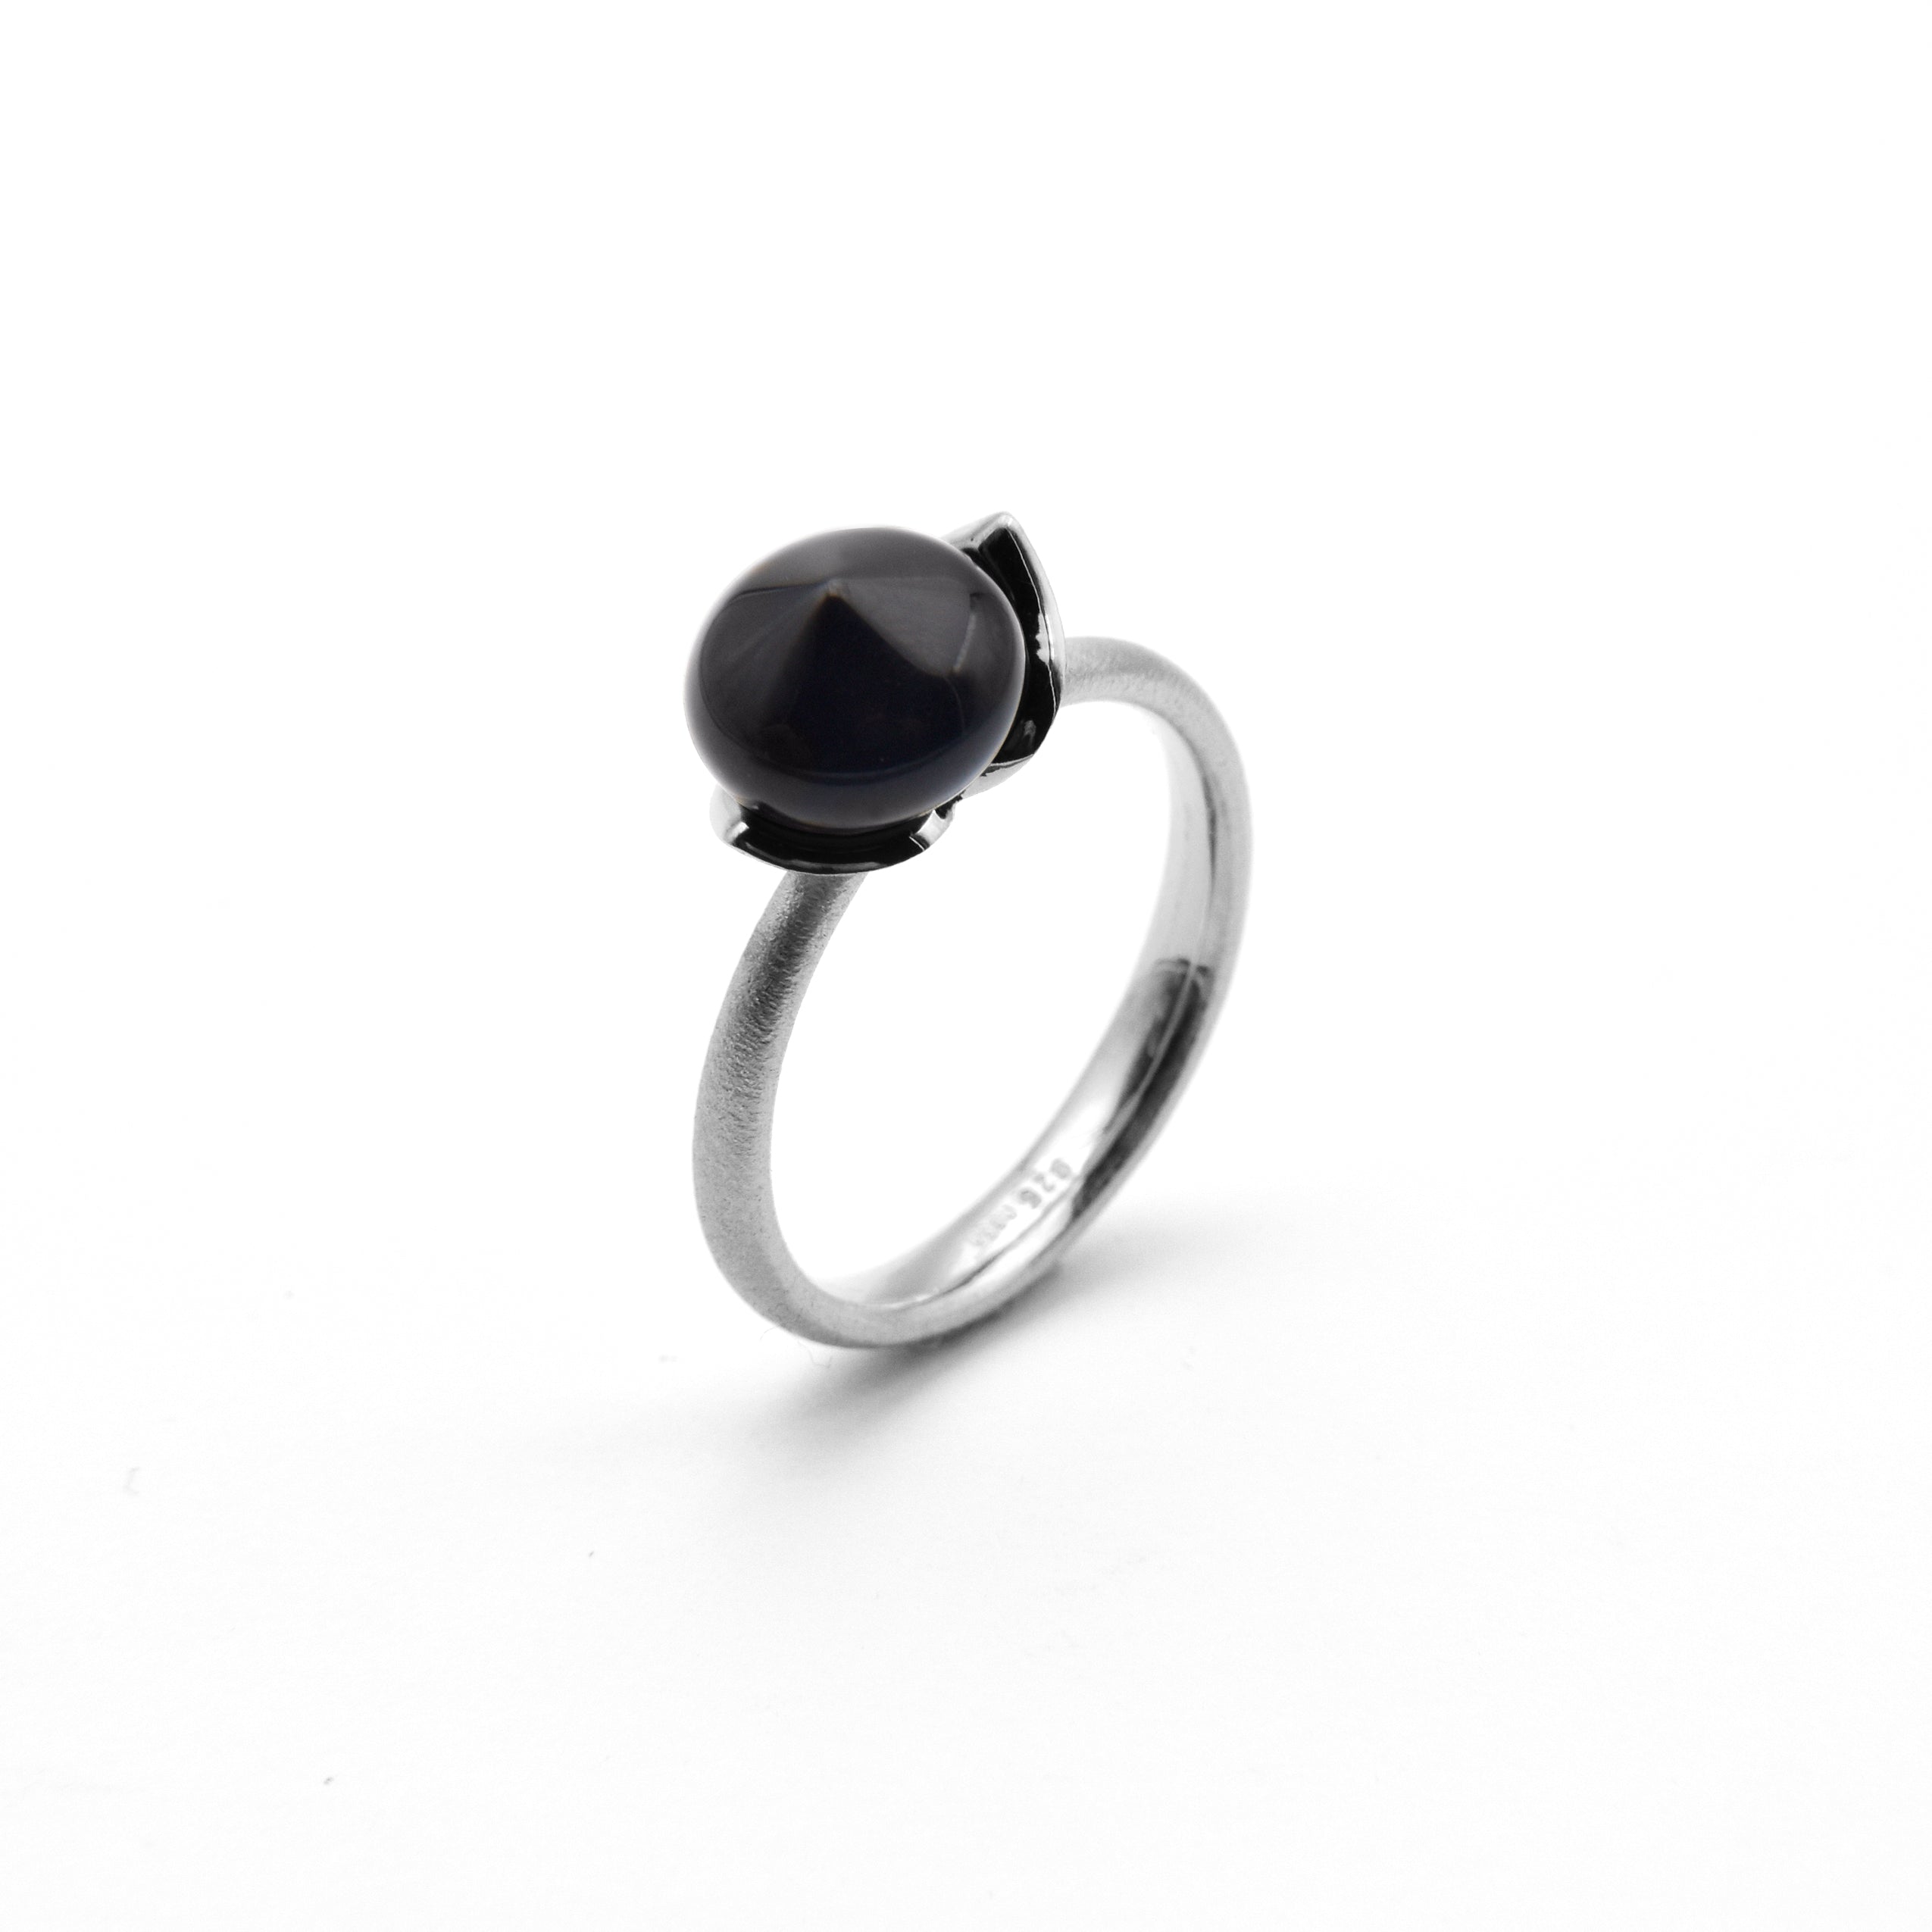 Dolce Ring "smal" mit Onix 925/-